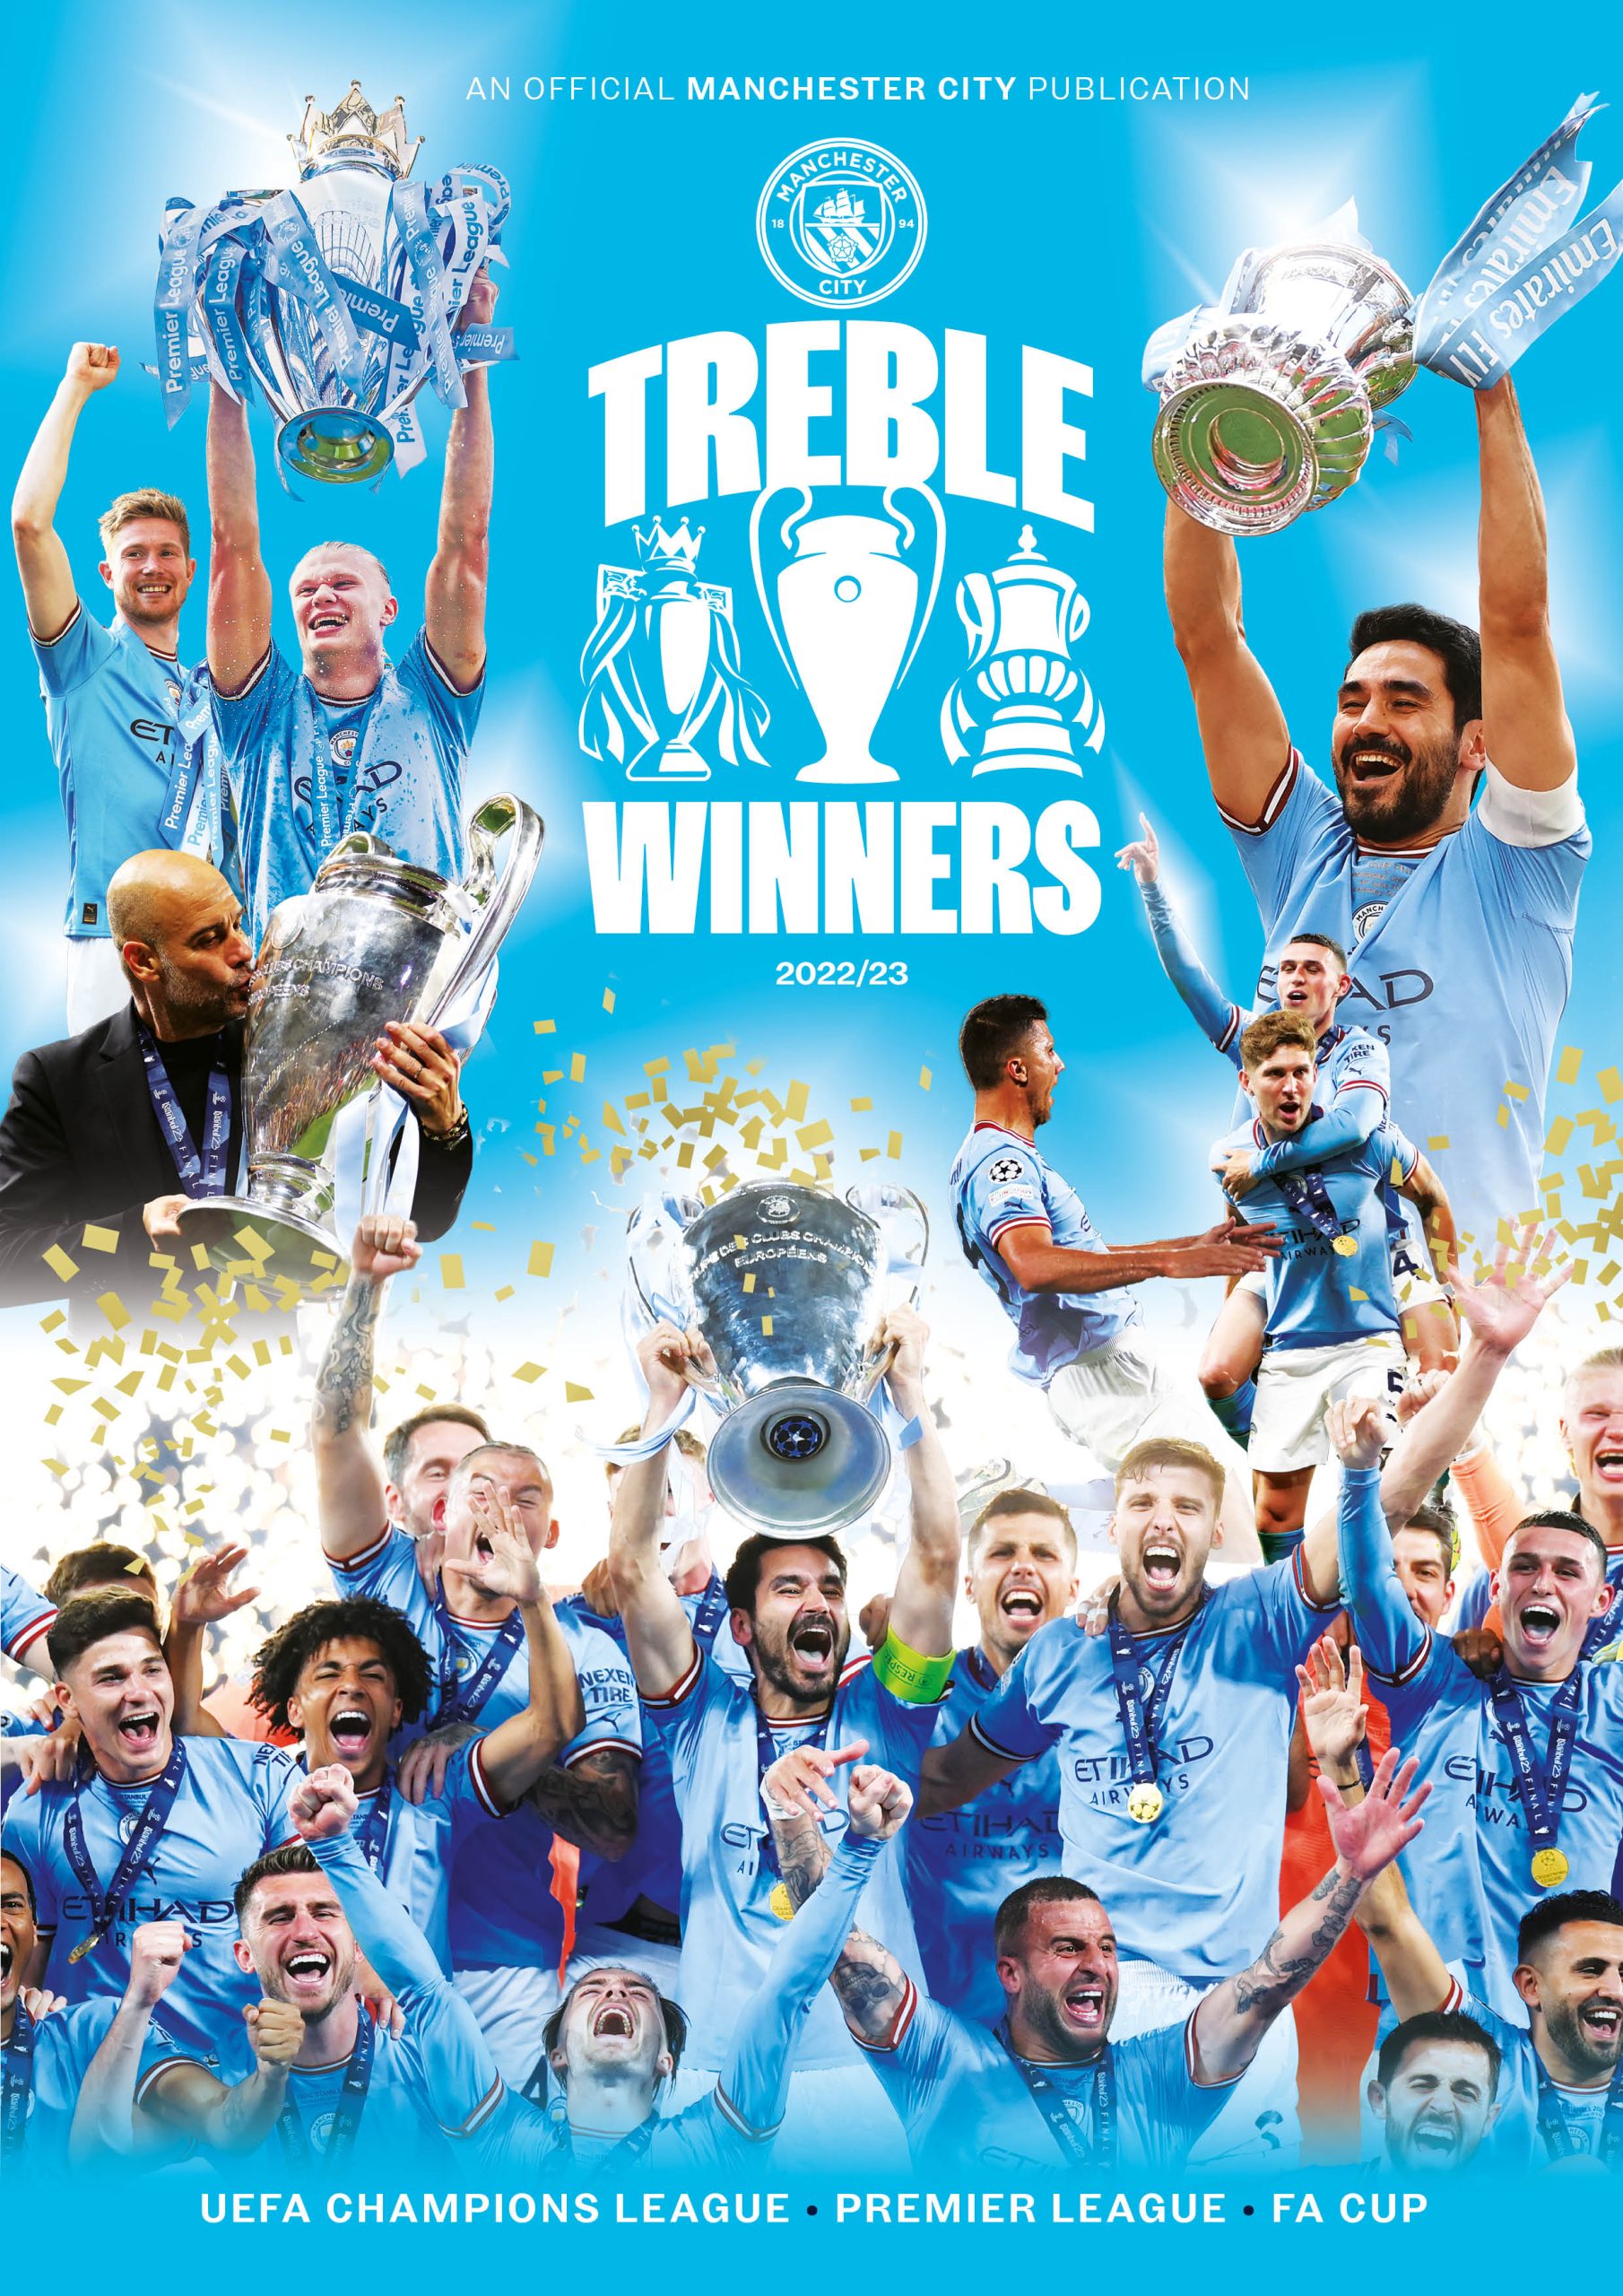 Manchester City - Manchester City updated their cover photo.